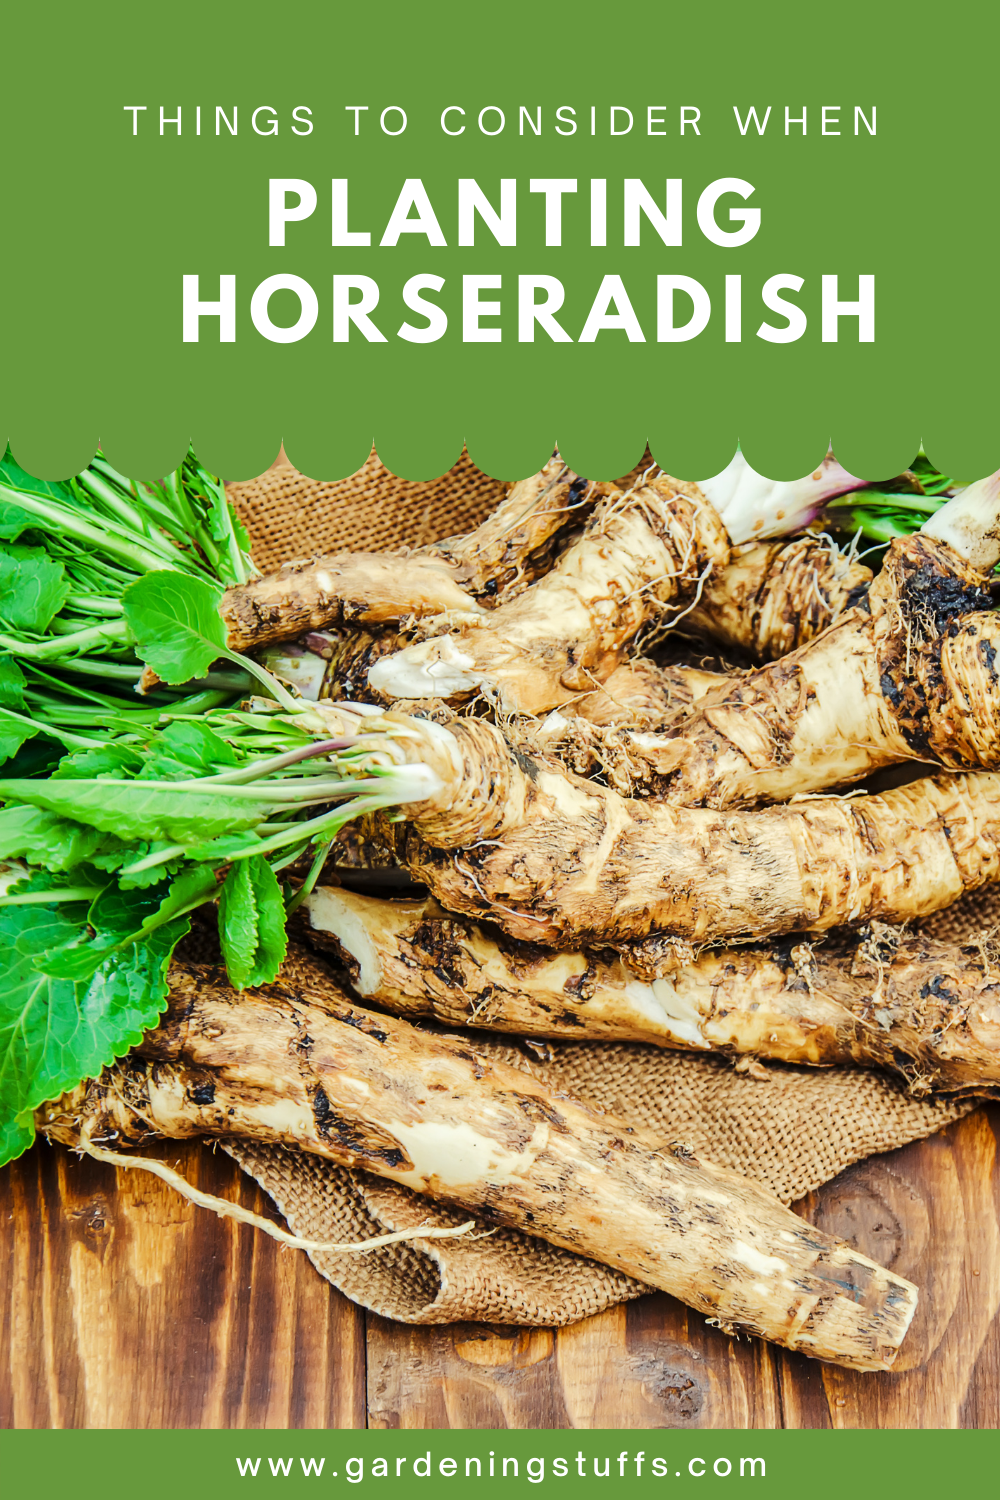 For horseradish sauce lovers. If you want to grow your own horseradish. There are things you need to look out for when planting horseradish. 